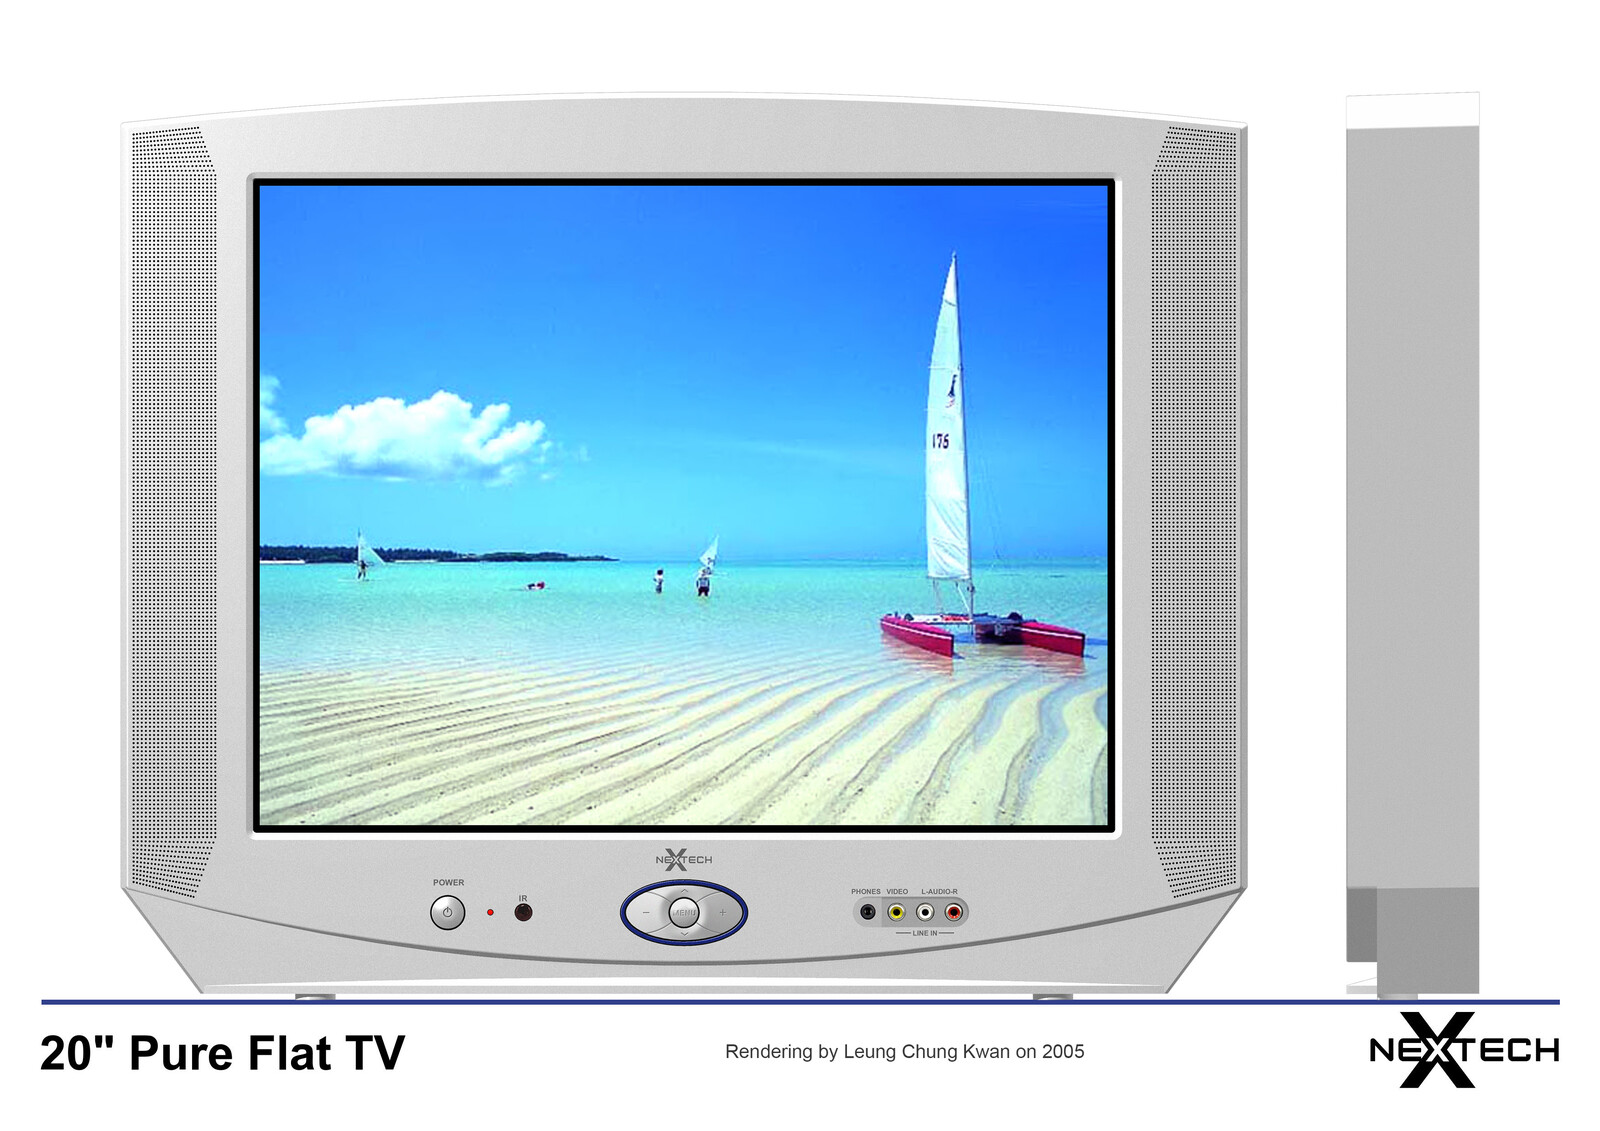 💎 20" Pure Flat TV | Rendering by Leung Chung Kwan on 2005 💎
Brand Name︰NEXTECH | Client︰Star Light Electronics Co., Ltd.